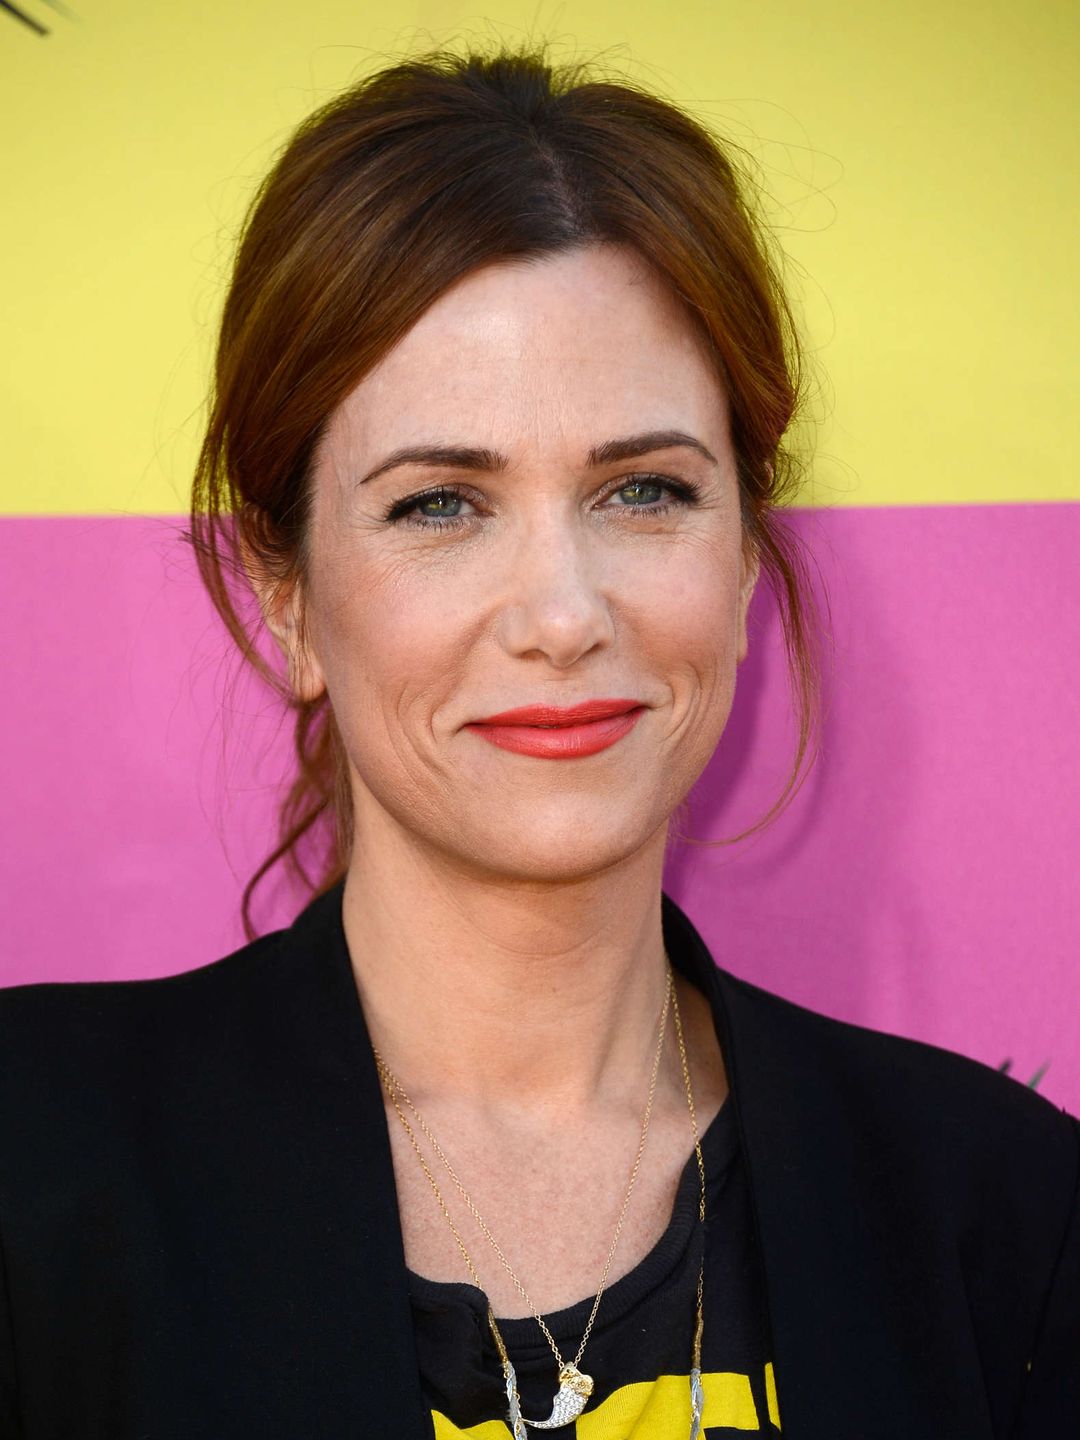 Kristen Wiig who is her father